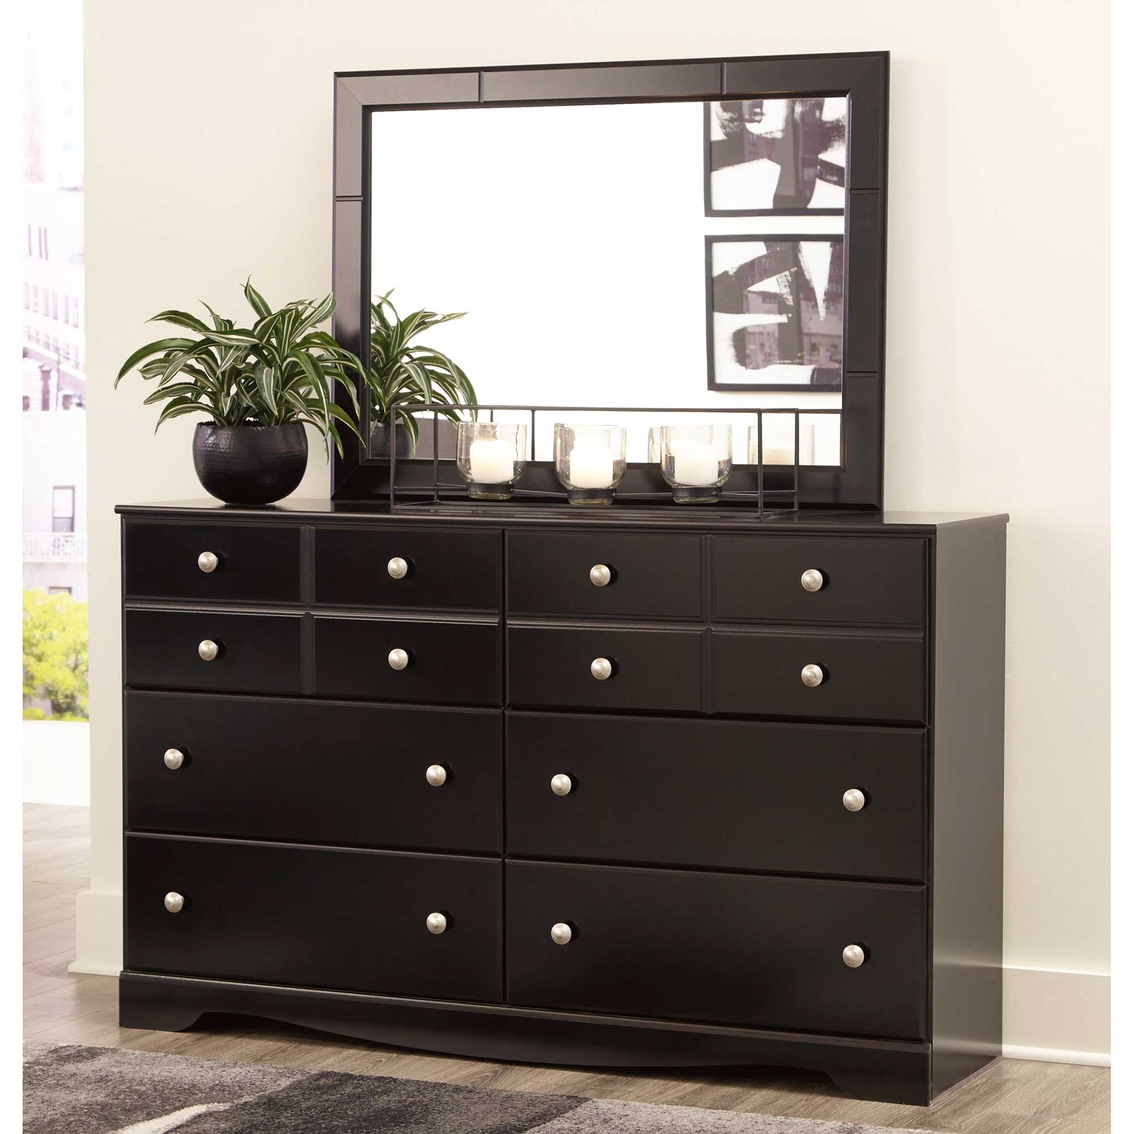 Signature Design by Ashley Mirlotown 6 Drawer Dresser and Mirror - Image 5 of 8